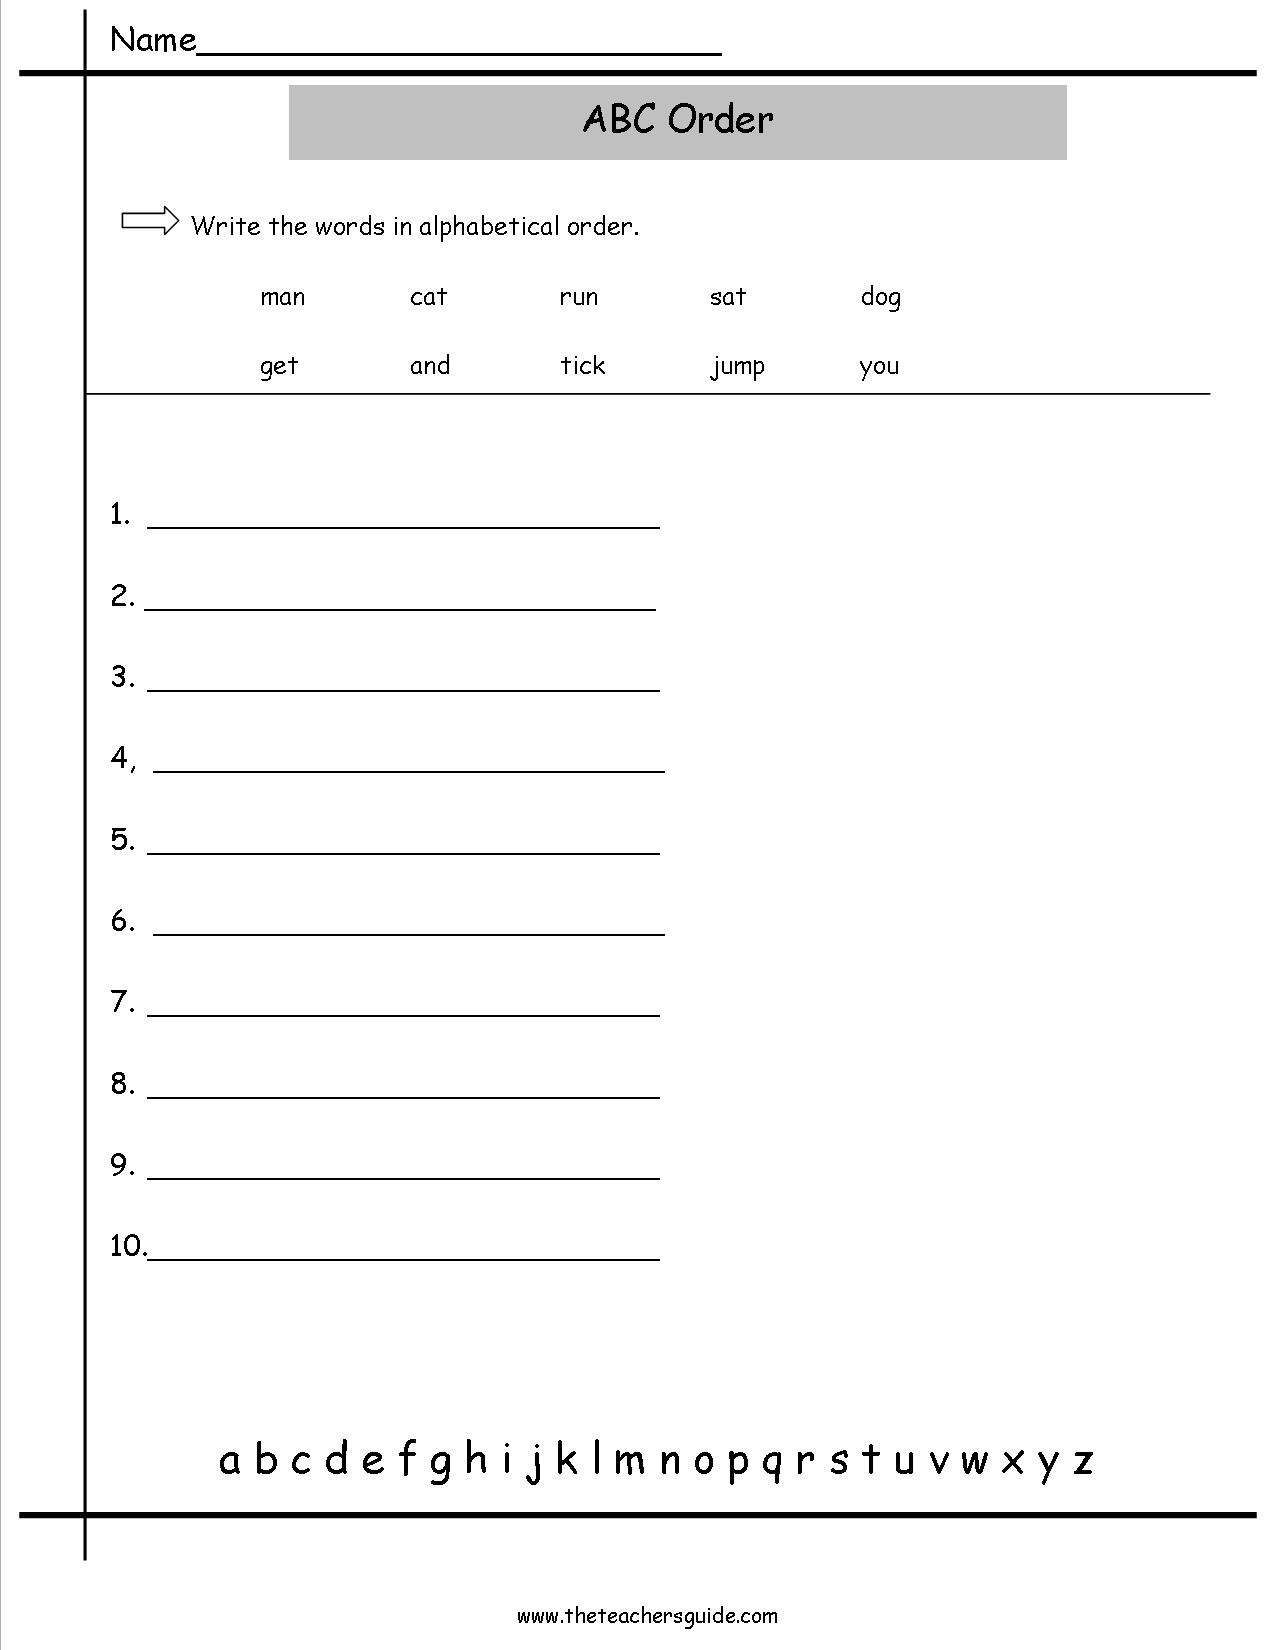 ABC Order Template Worksheets